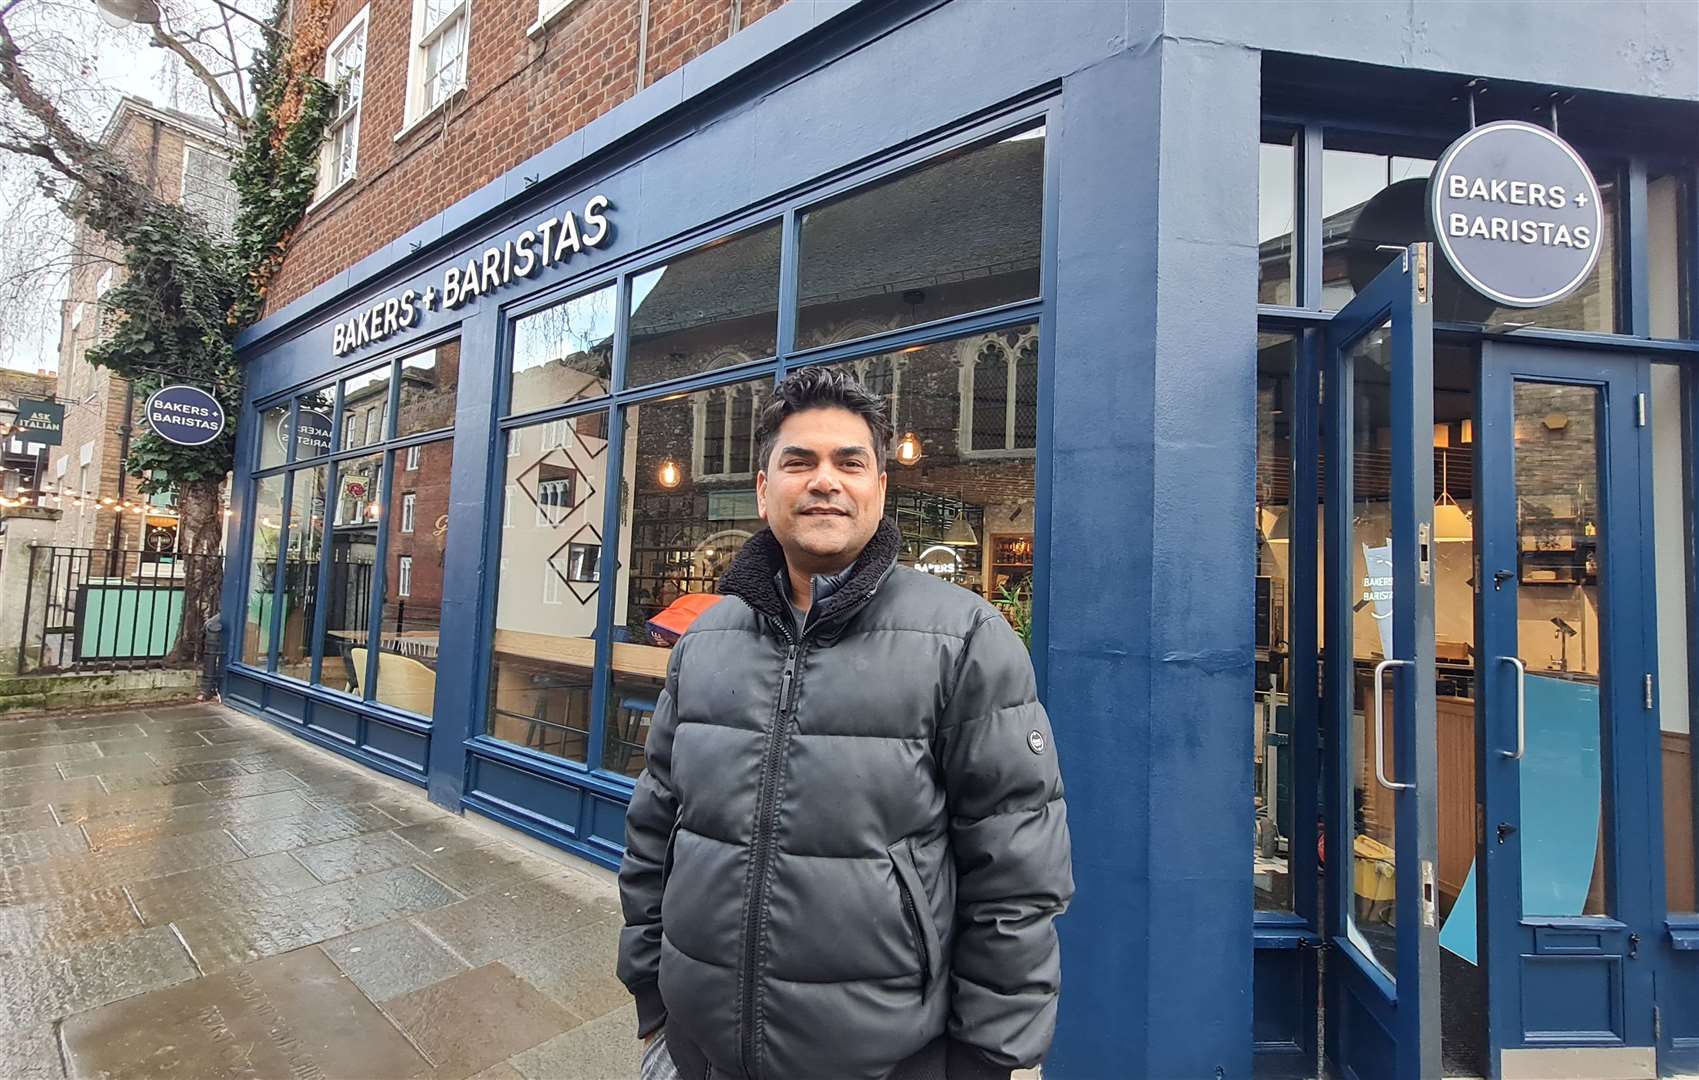 Franchise holder Amer Qayyum outside the new Bakers + Baristas branch in Canterbury